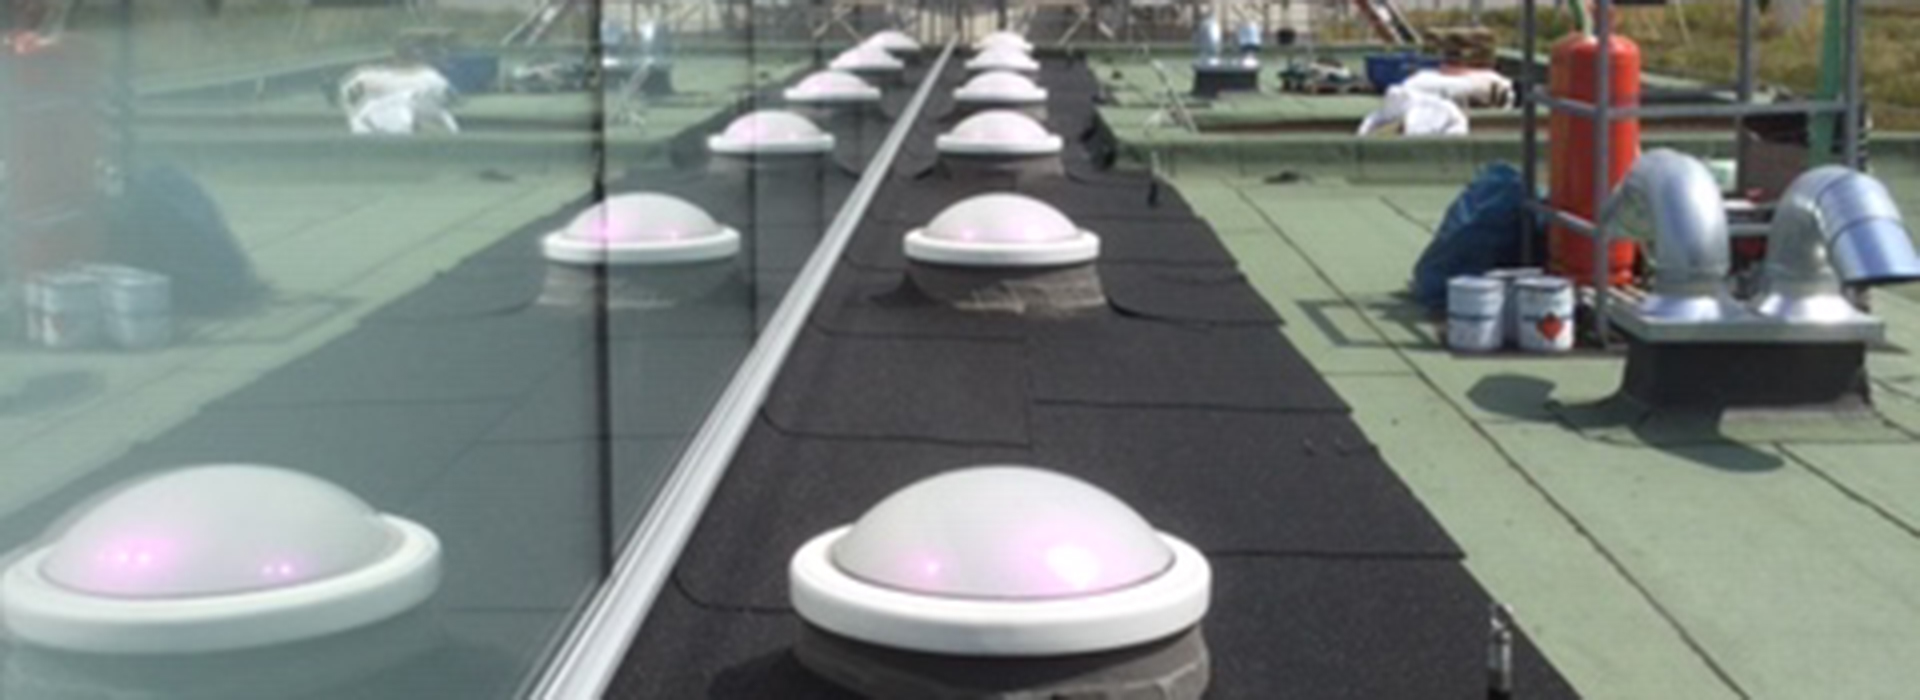 Circular rooflight domes on roof